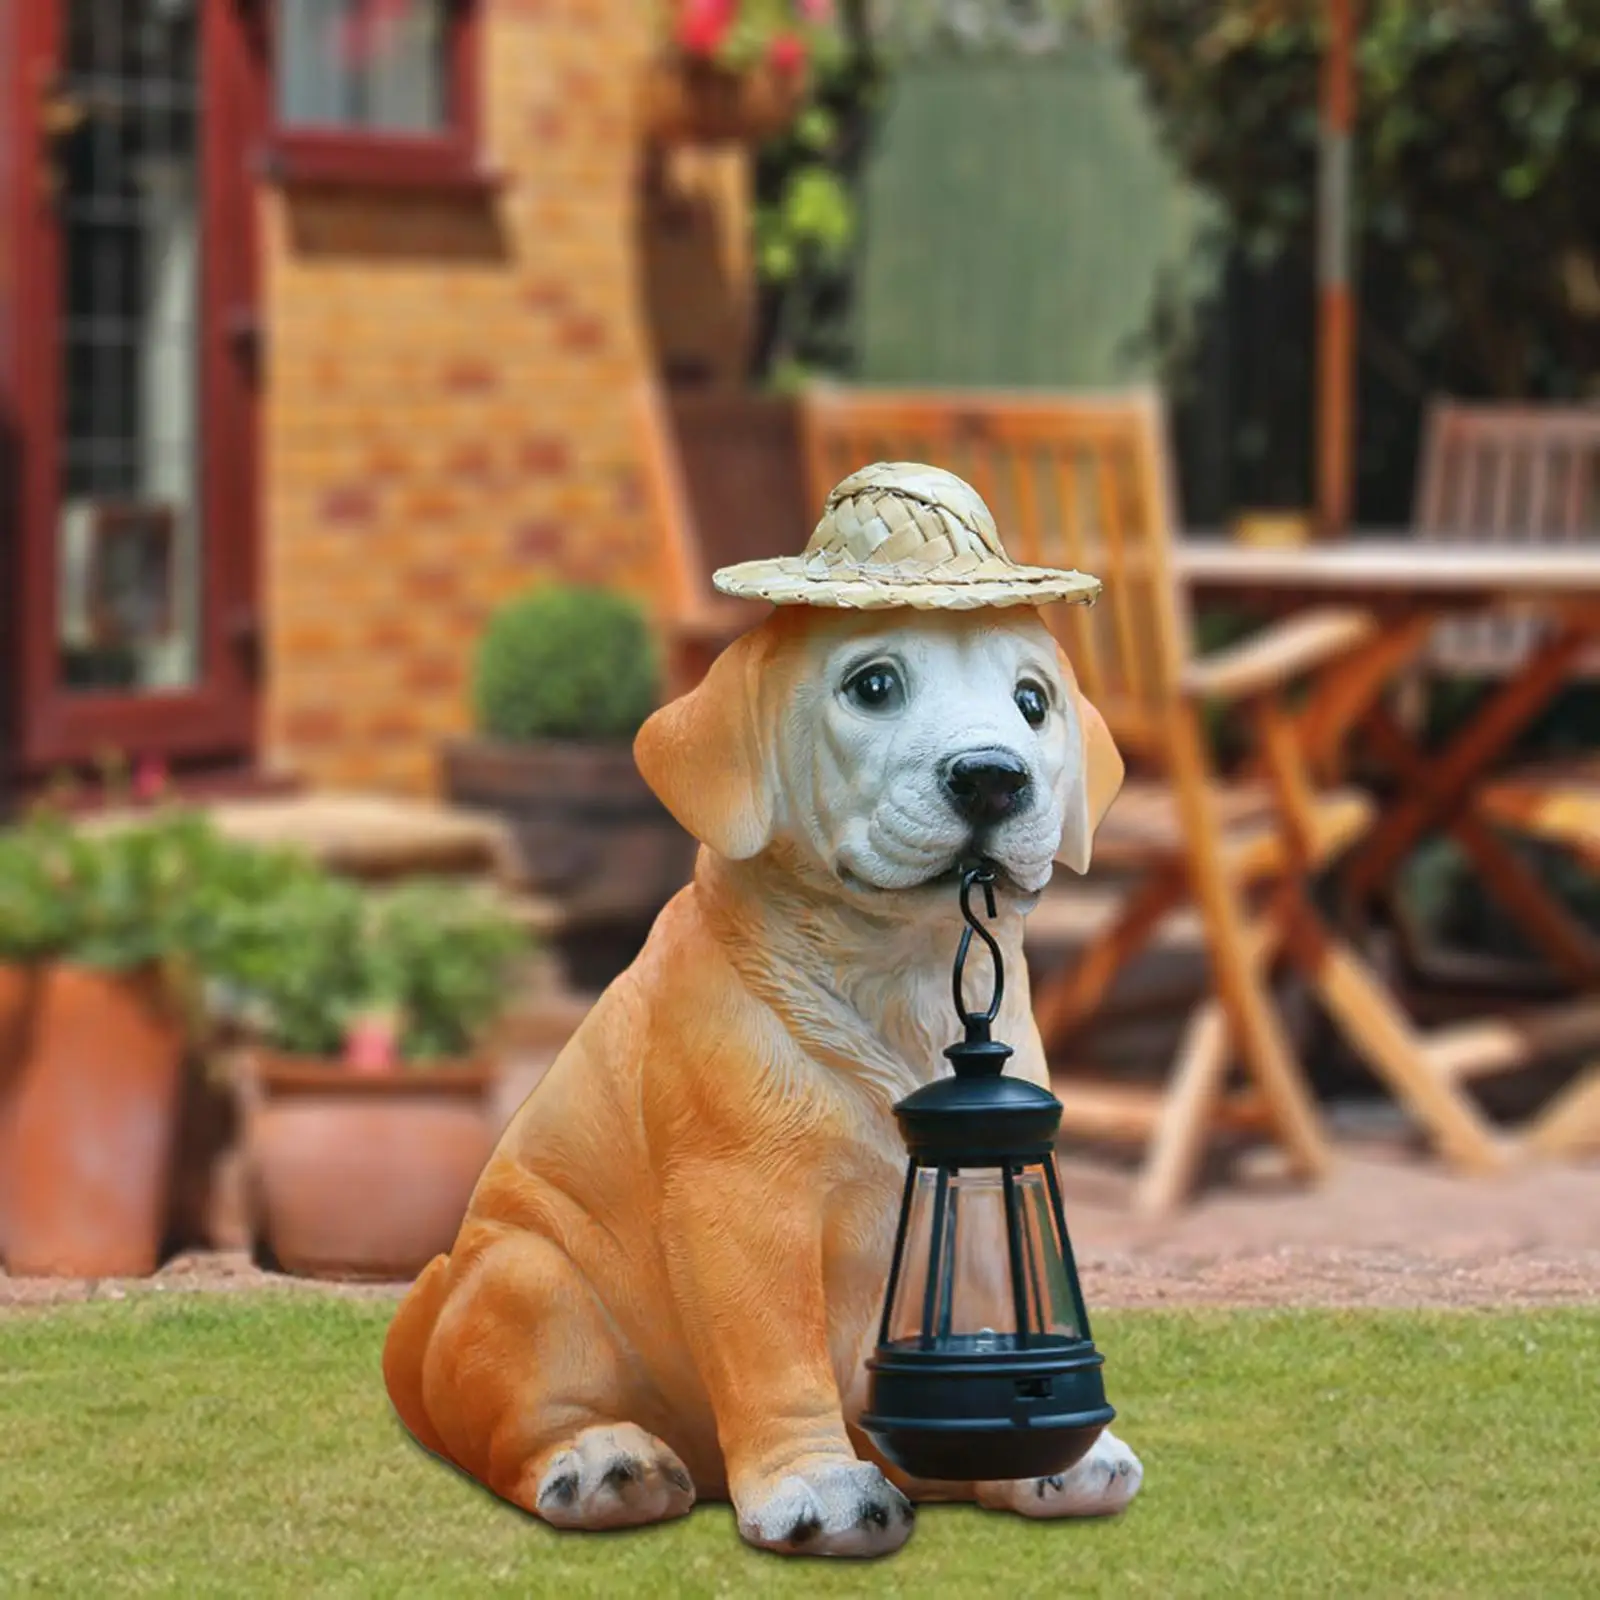 

Patio Dog Figurine with Solar Powered Light Lawn Ornament Resin Sculpture Indoor